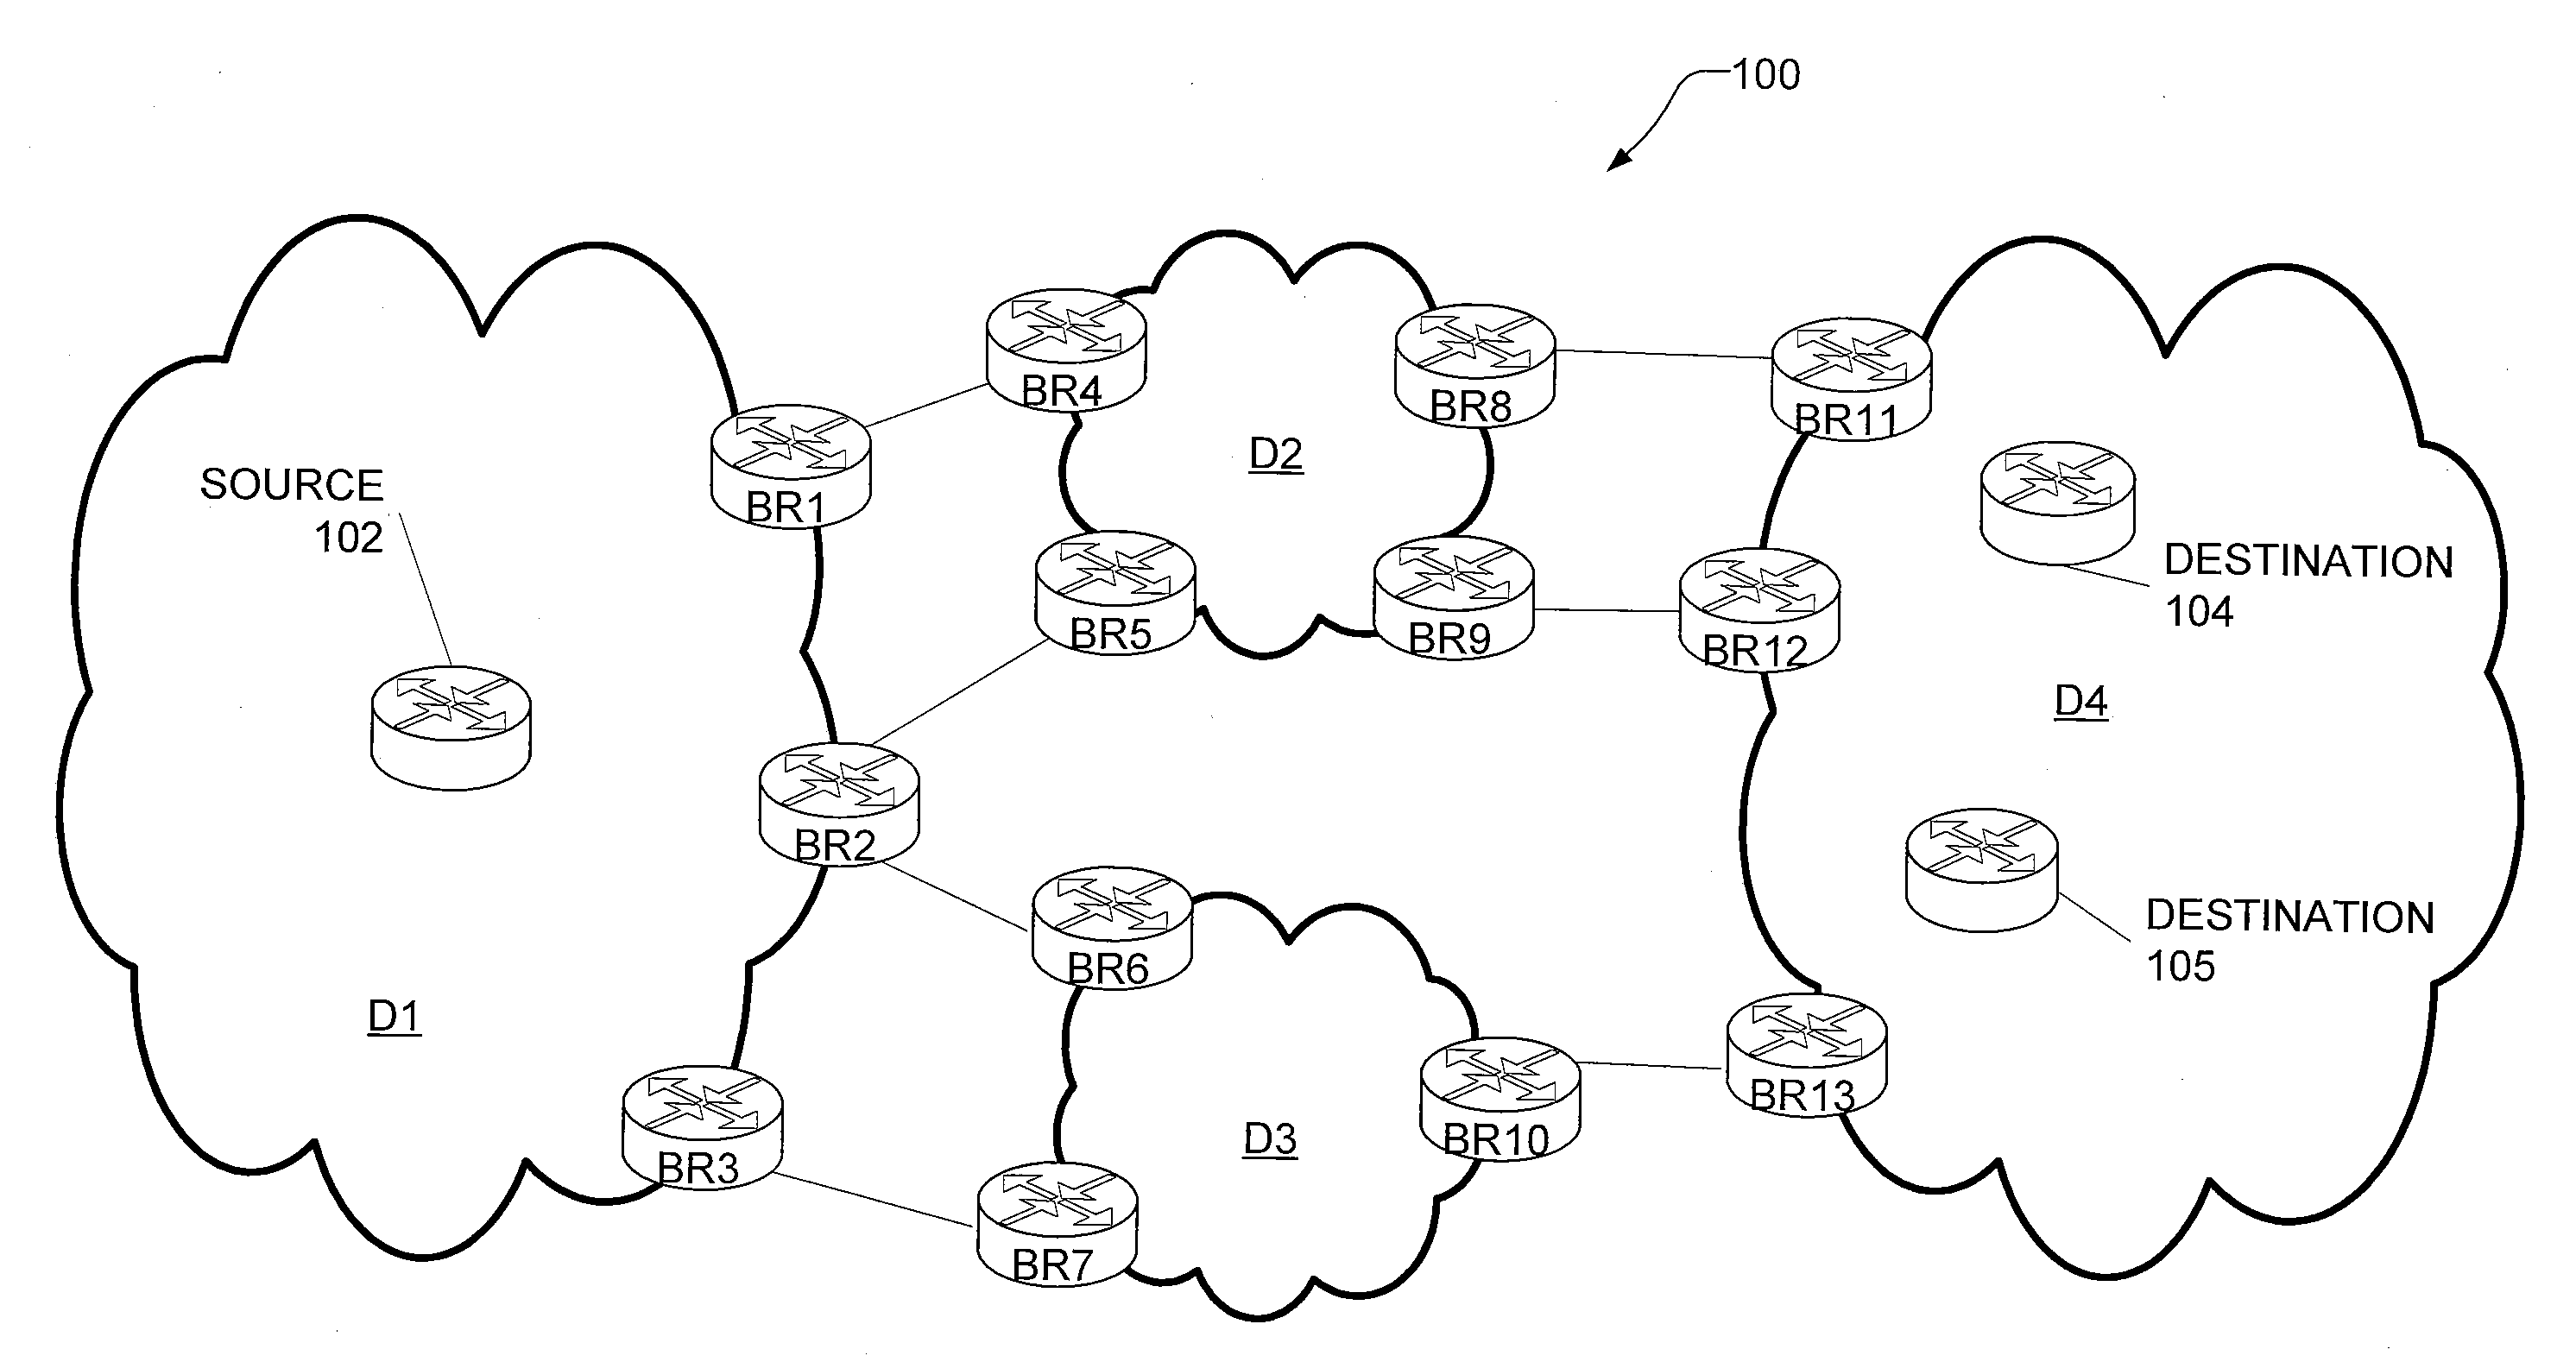 Dynamic update of a multicast tree